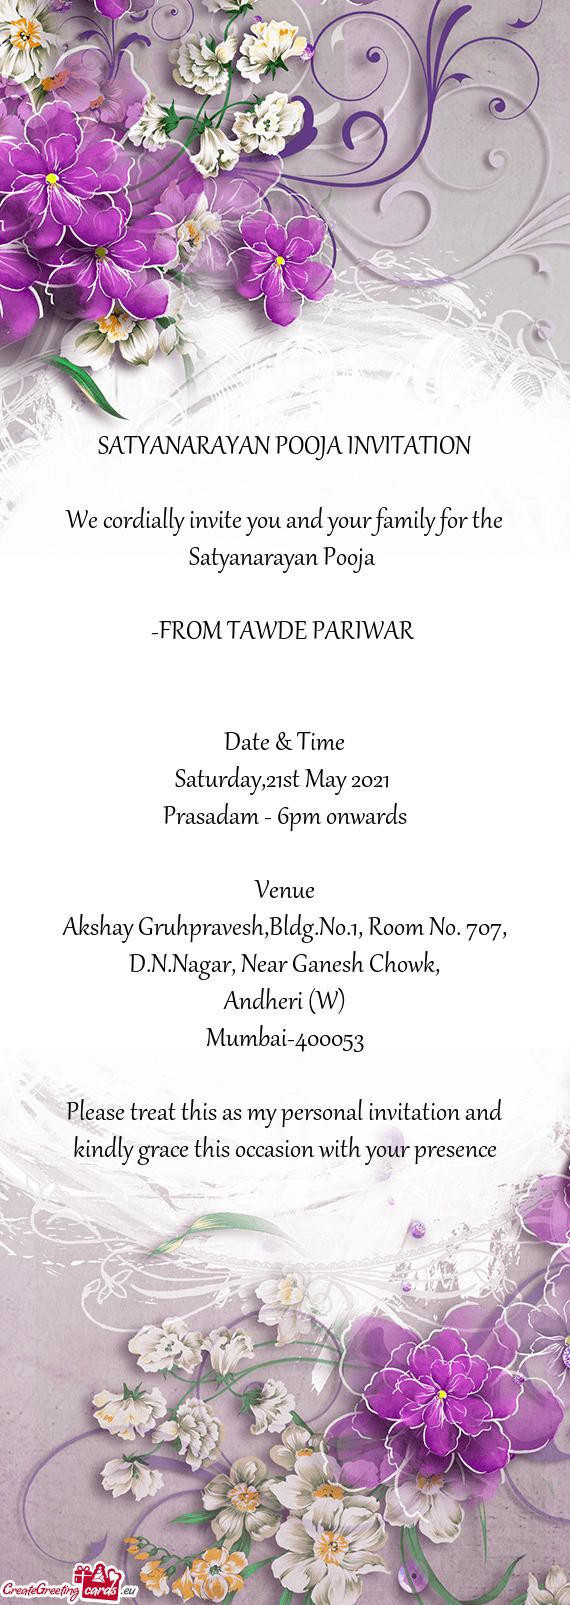 We cordially invite you and your family for the Satyanarayan Pooja